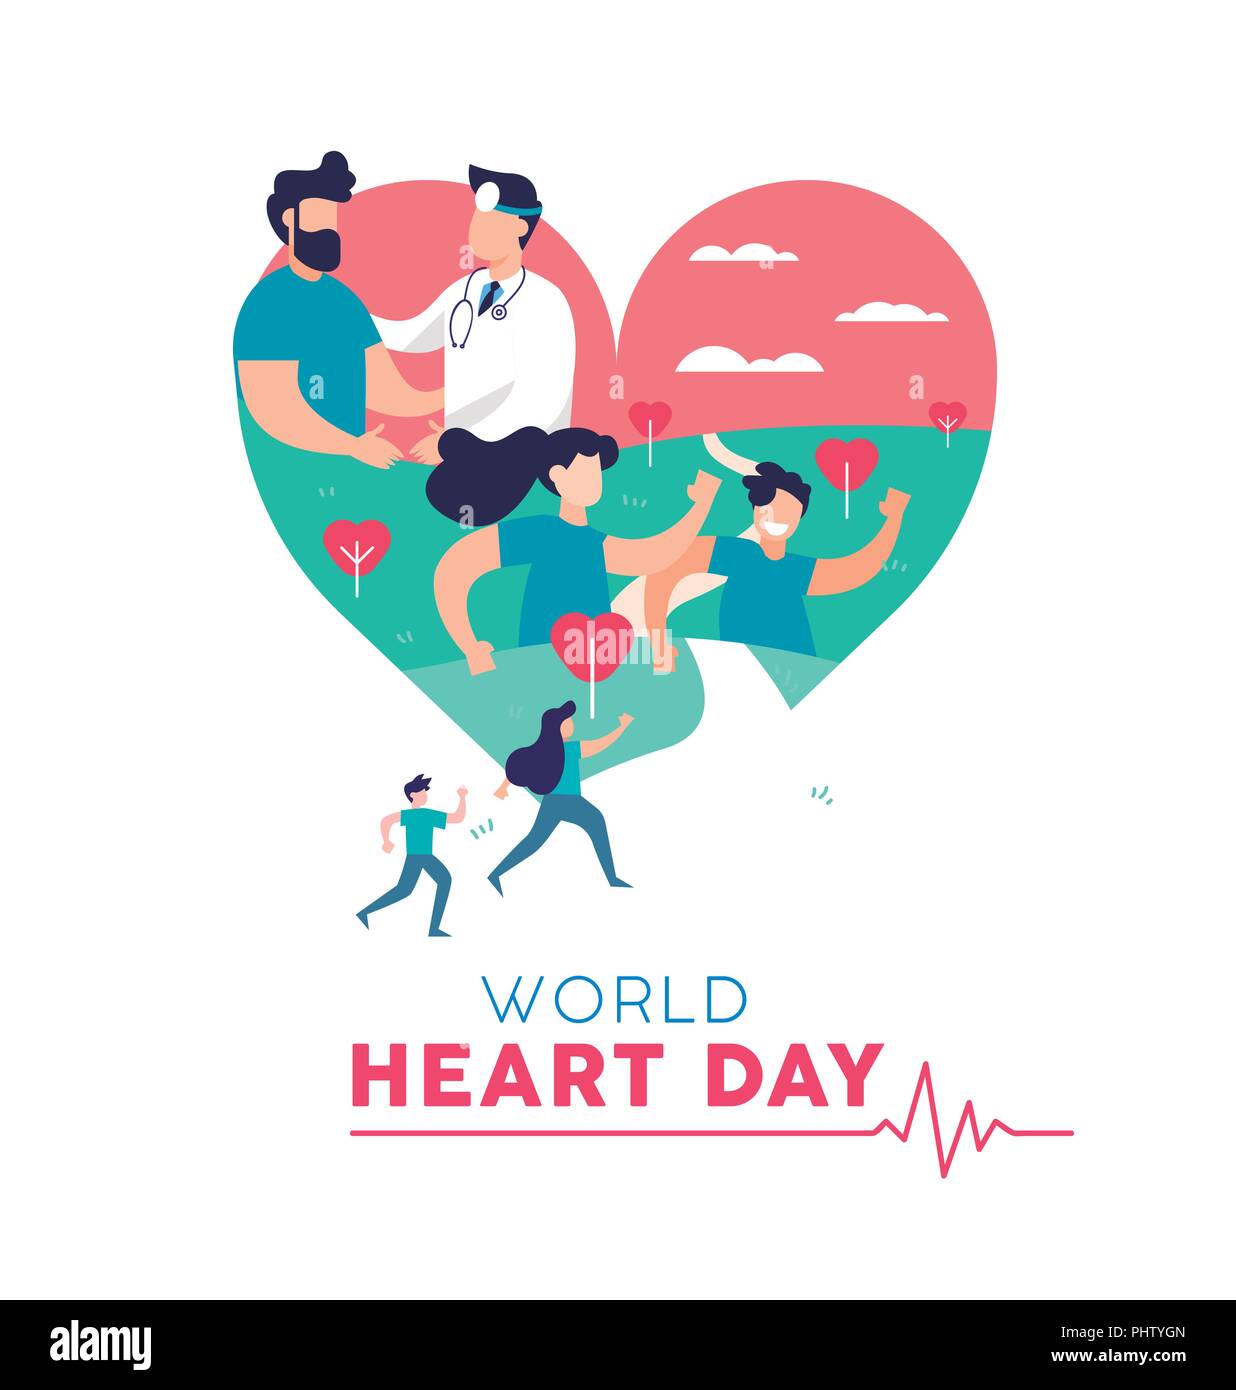 World Heart Day illustration concept, health care awareness. People